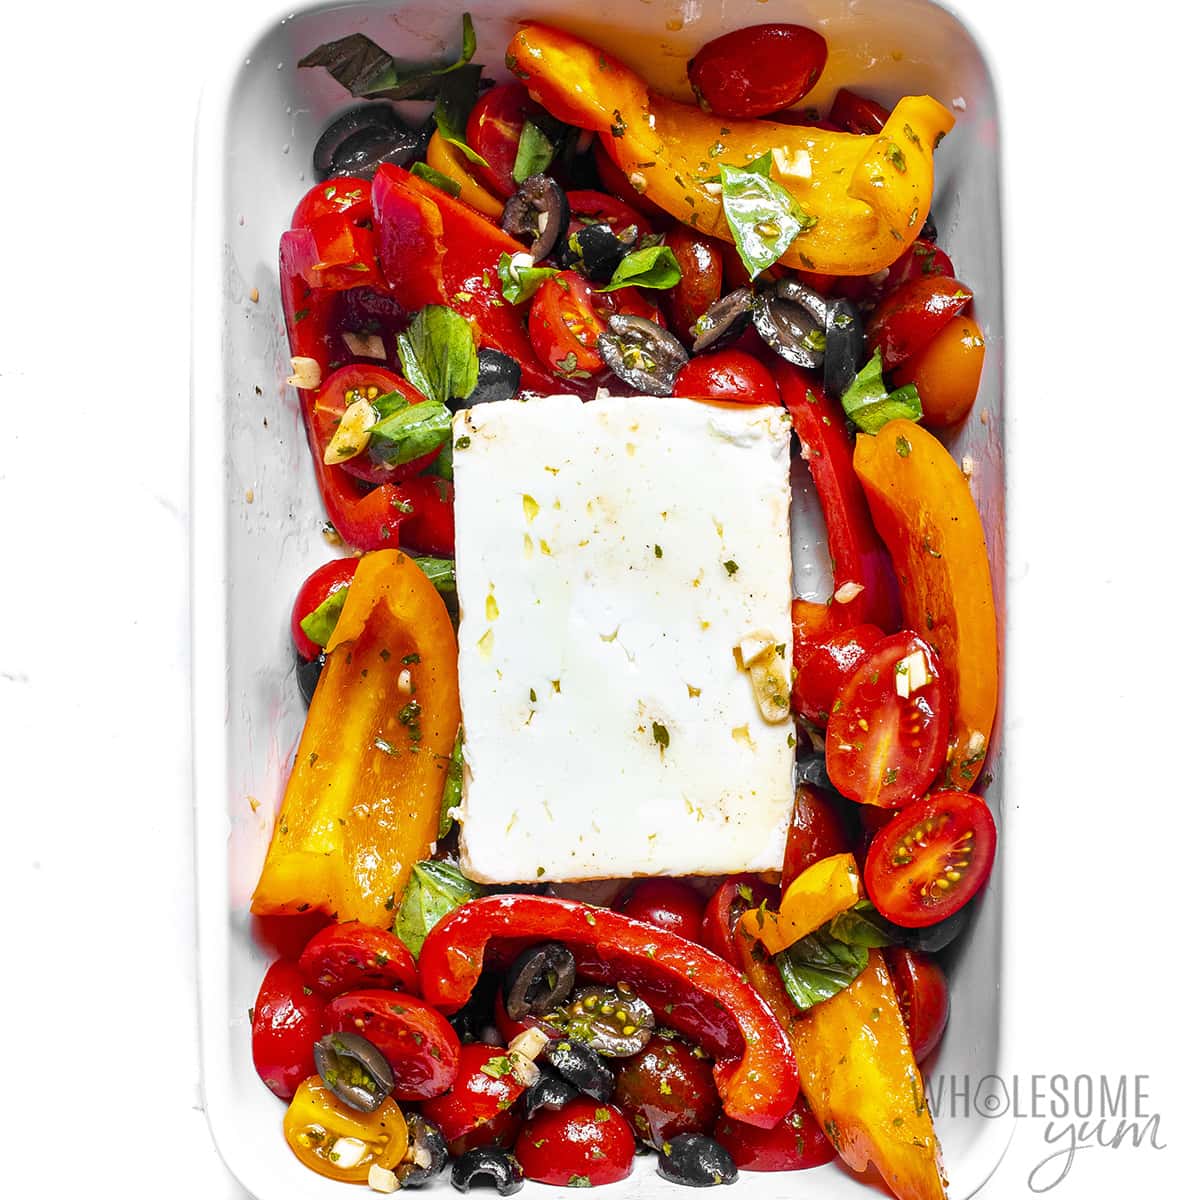 The feta cheese in the center of the griddle is surrounded by vegetables.